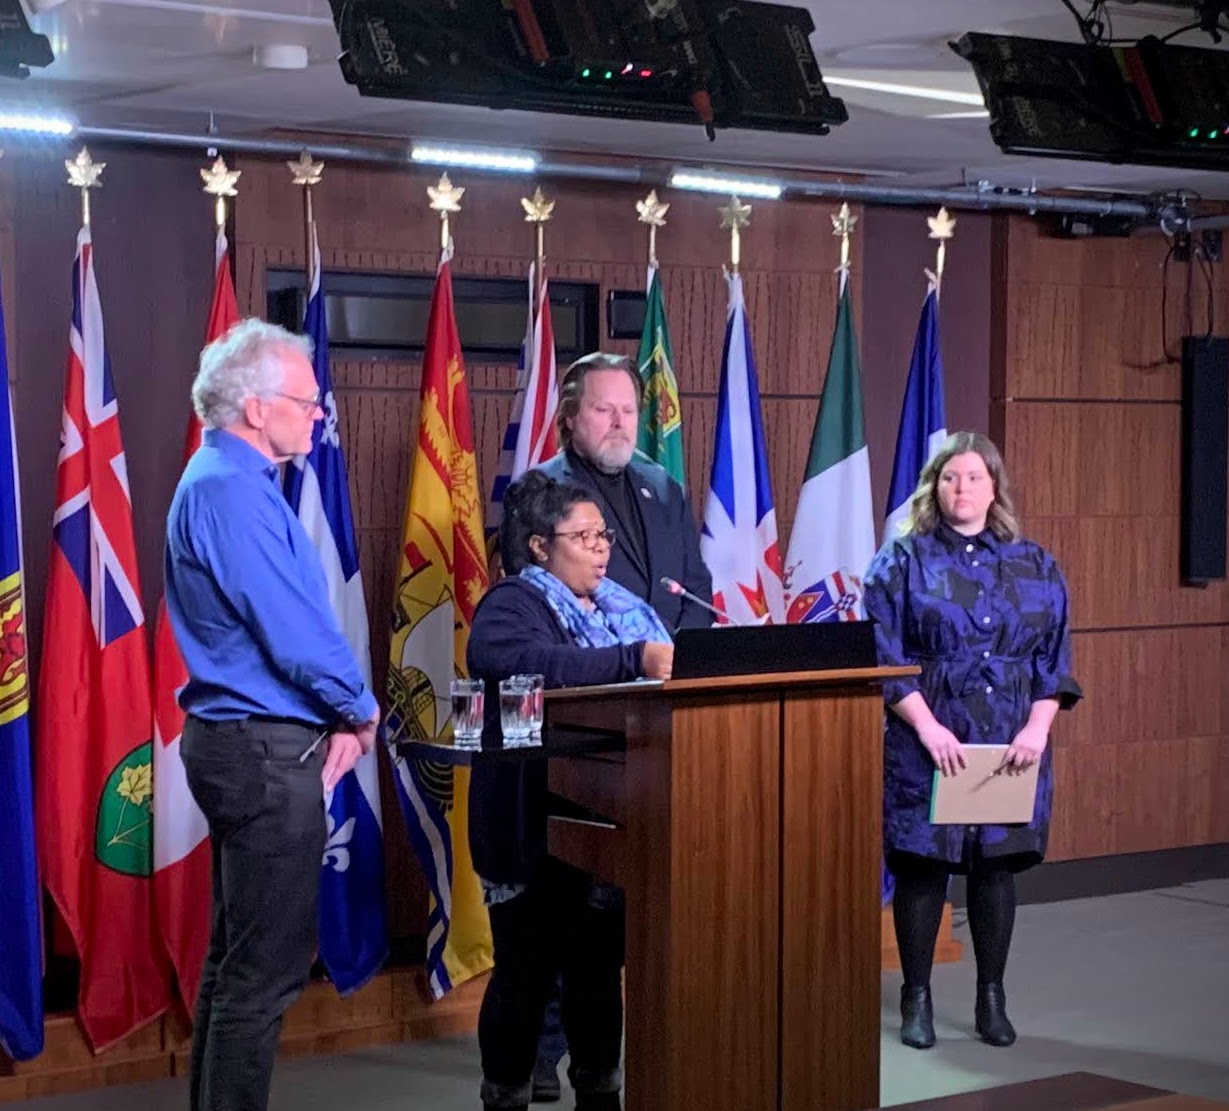 Marty Warren, USW National Director for Canada, and USW staff join Kalpona Akter, Executive Director, Bangladesh Center for Workers Solidarity at a press conference on Parliament Hill